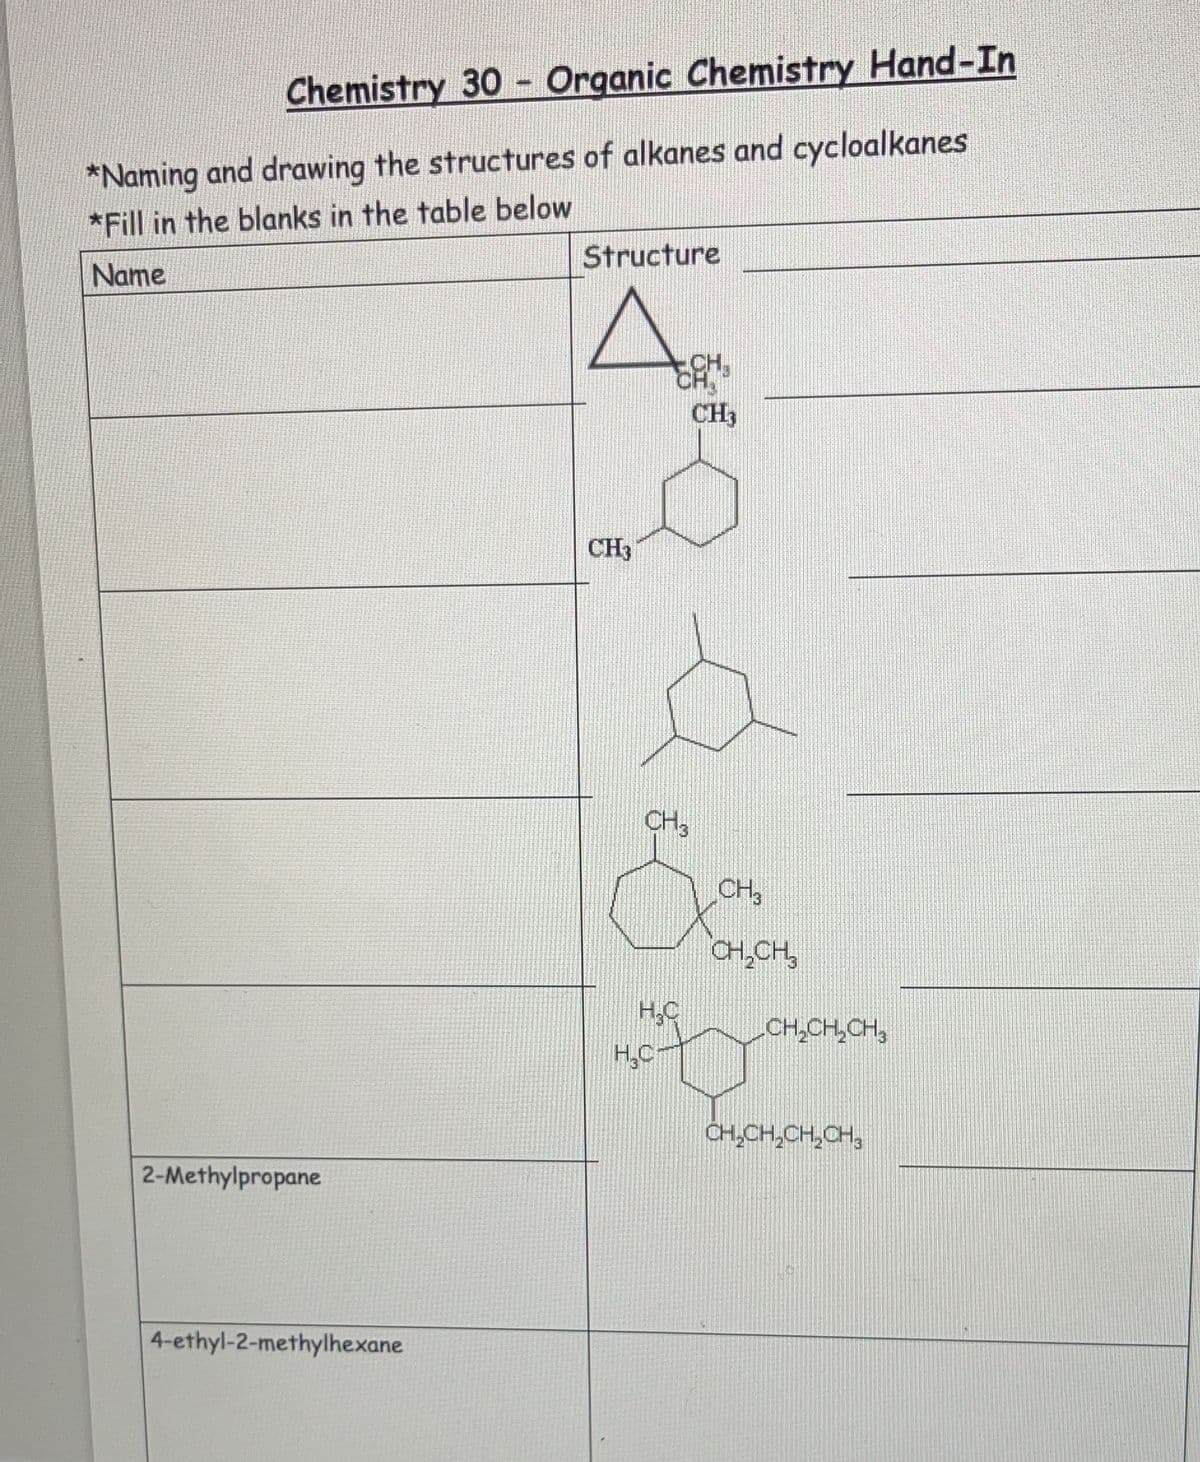 Chemistry 30 - Organic Chemistry Hand-In
*Naming and drawing the structures of alkanes and cycloalkanes
*Fill in the blanks in the table below
Structure
Name
CH.
CH3
CH3
CH3
CH
CH,CH,
H.C
CH,CH,CH,
CH,CH,CH,CH,
2-Methylpropane
4-ethyl-2-methylhexane
